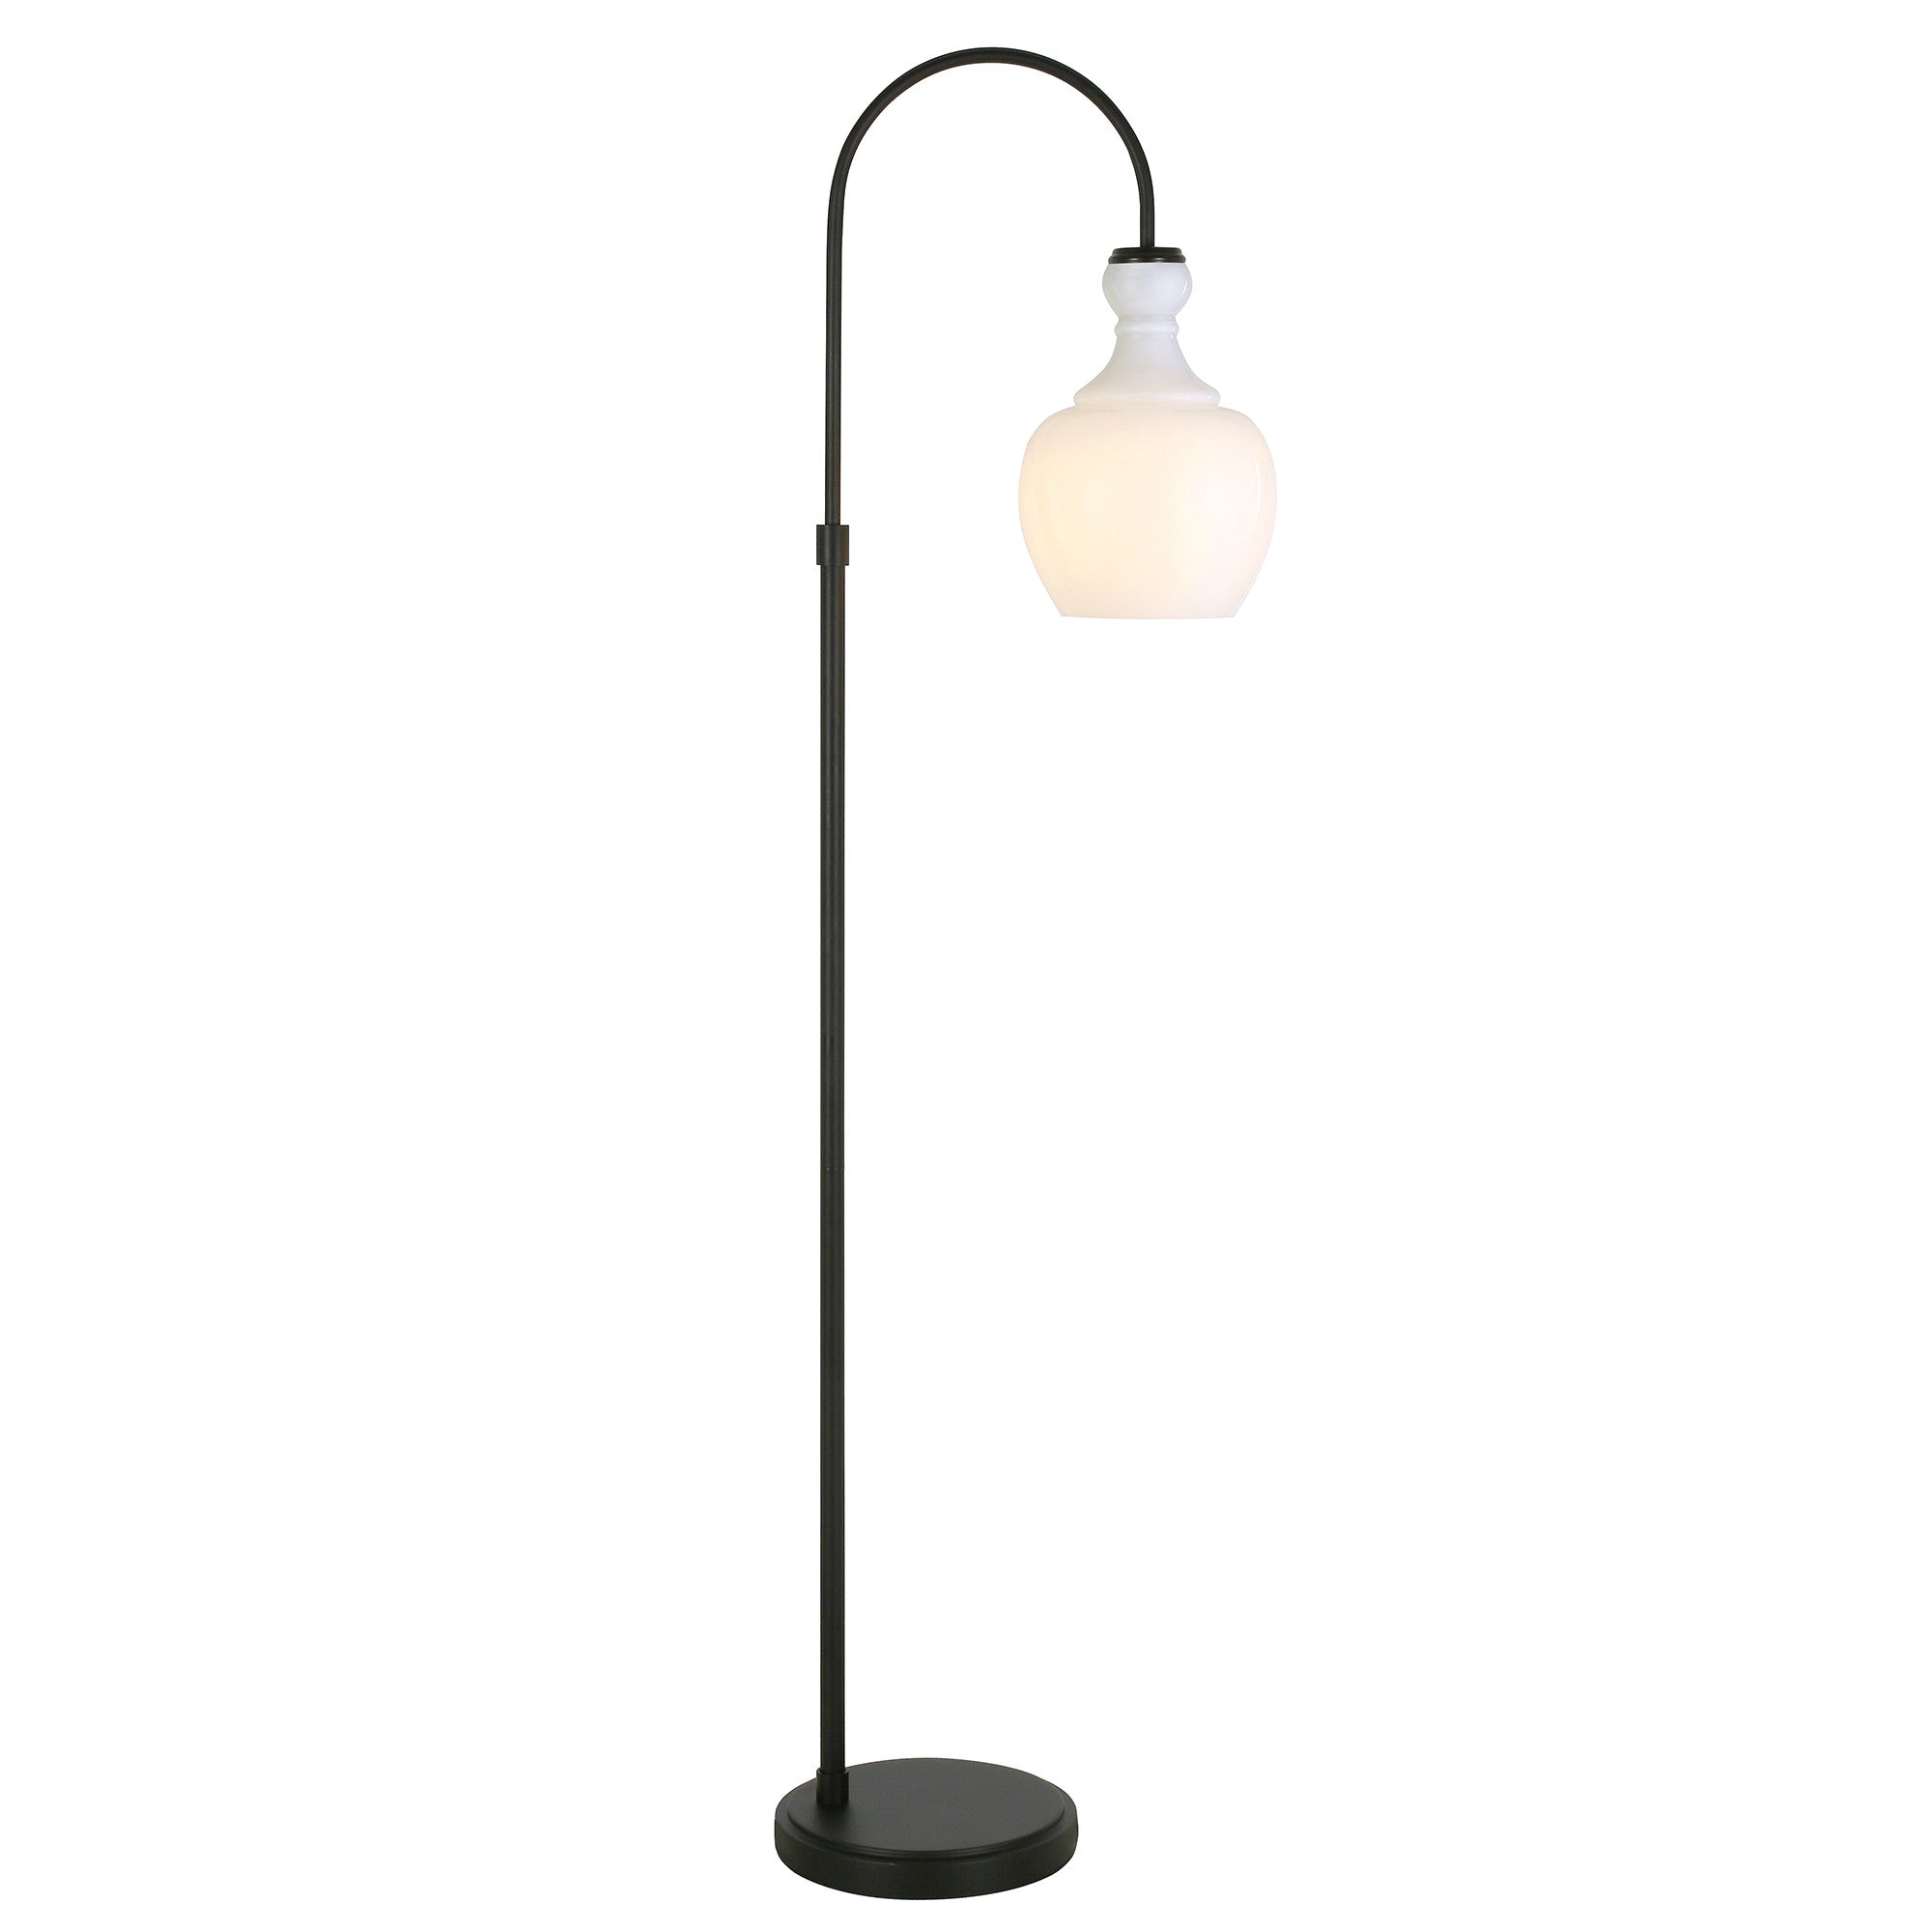 70" Black Arched Floor Lamp With White Frosted Glass Dome Shade